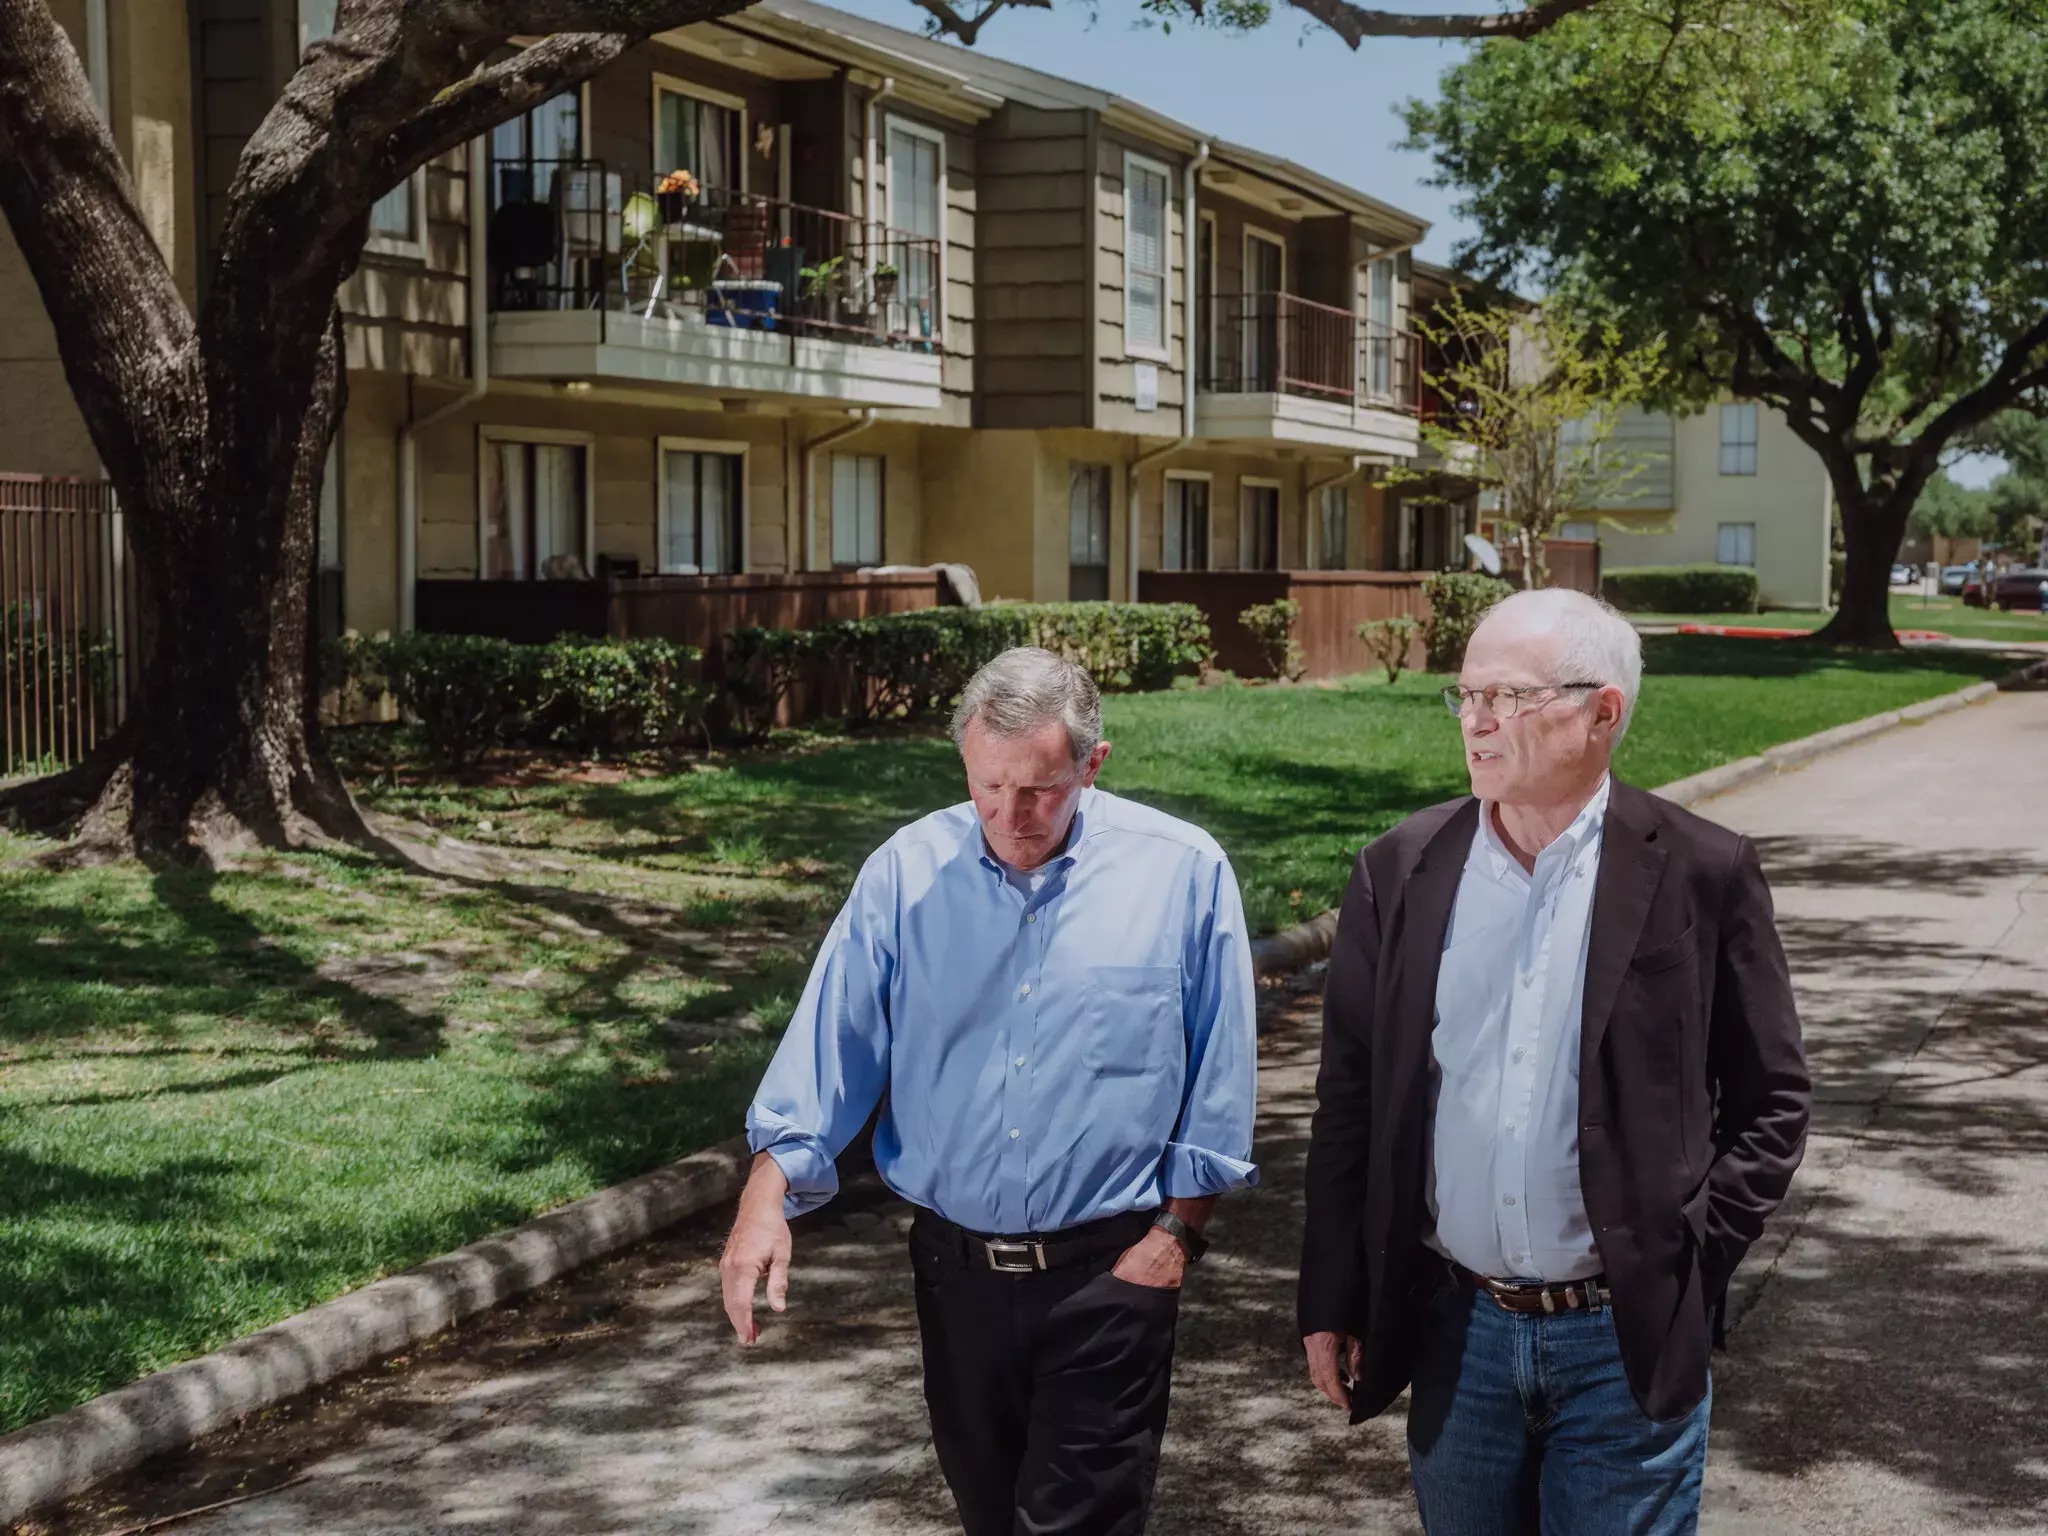 Lance Gilliam and a colleague walk down a street in Houston